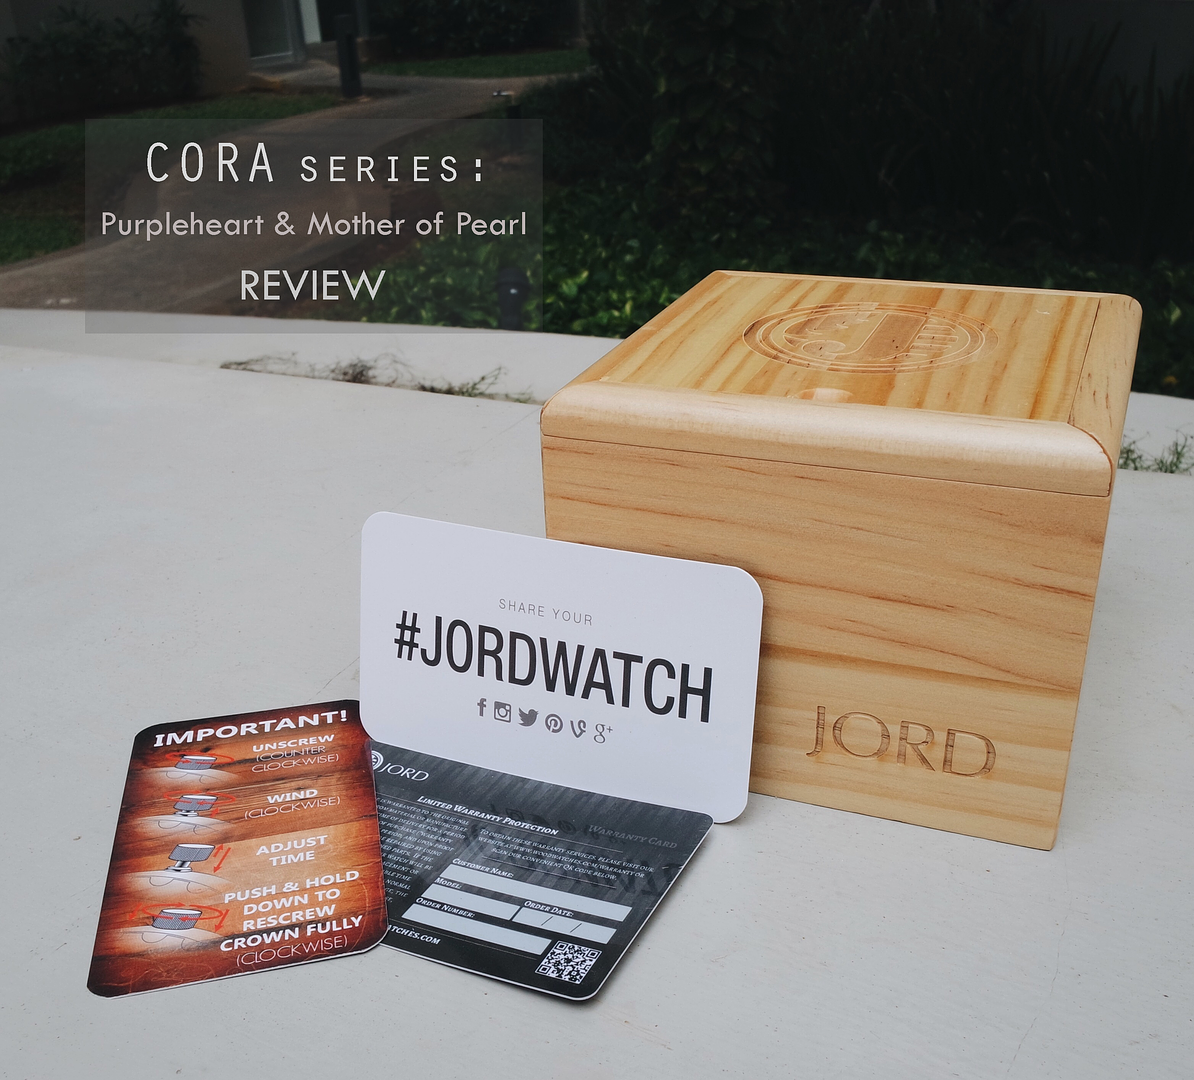 jord cora purpleheart & mother of pearl review